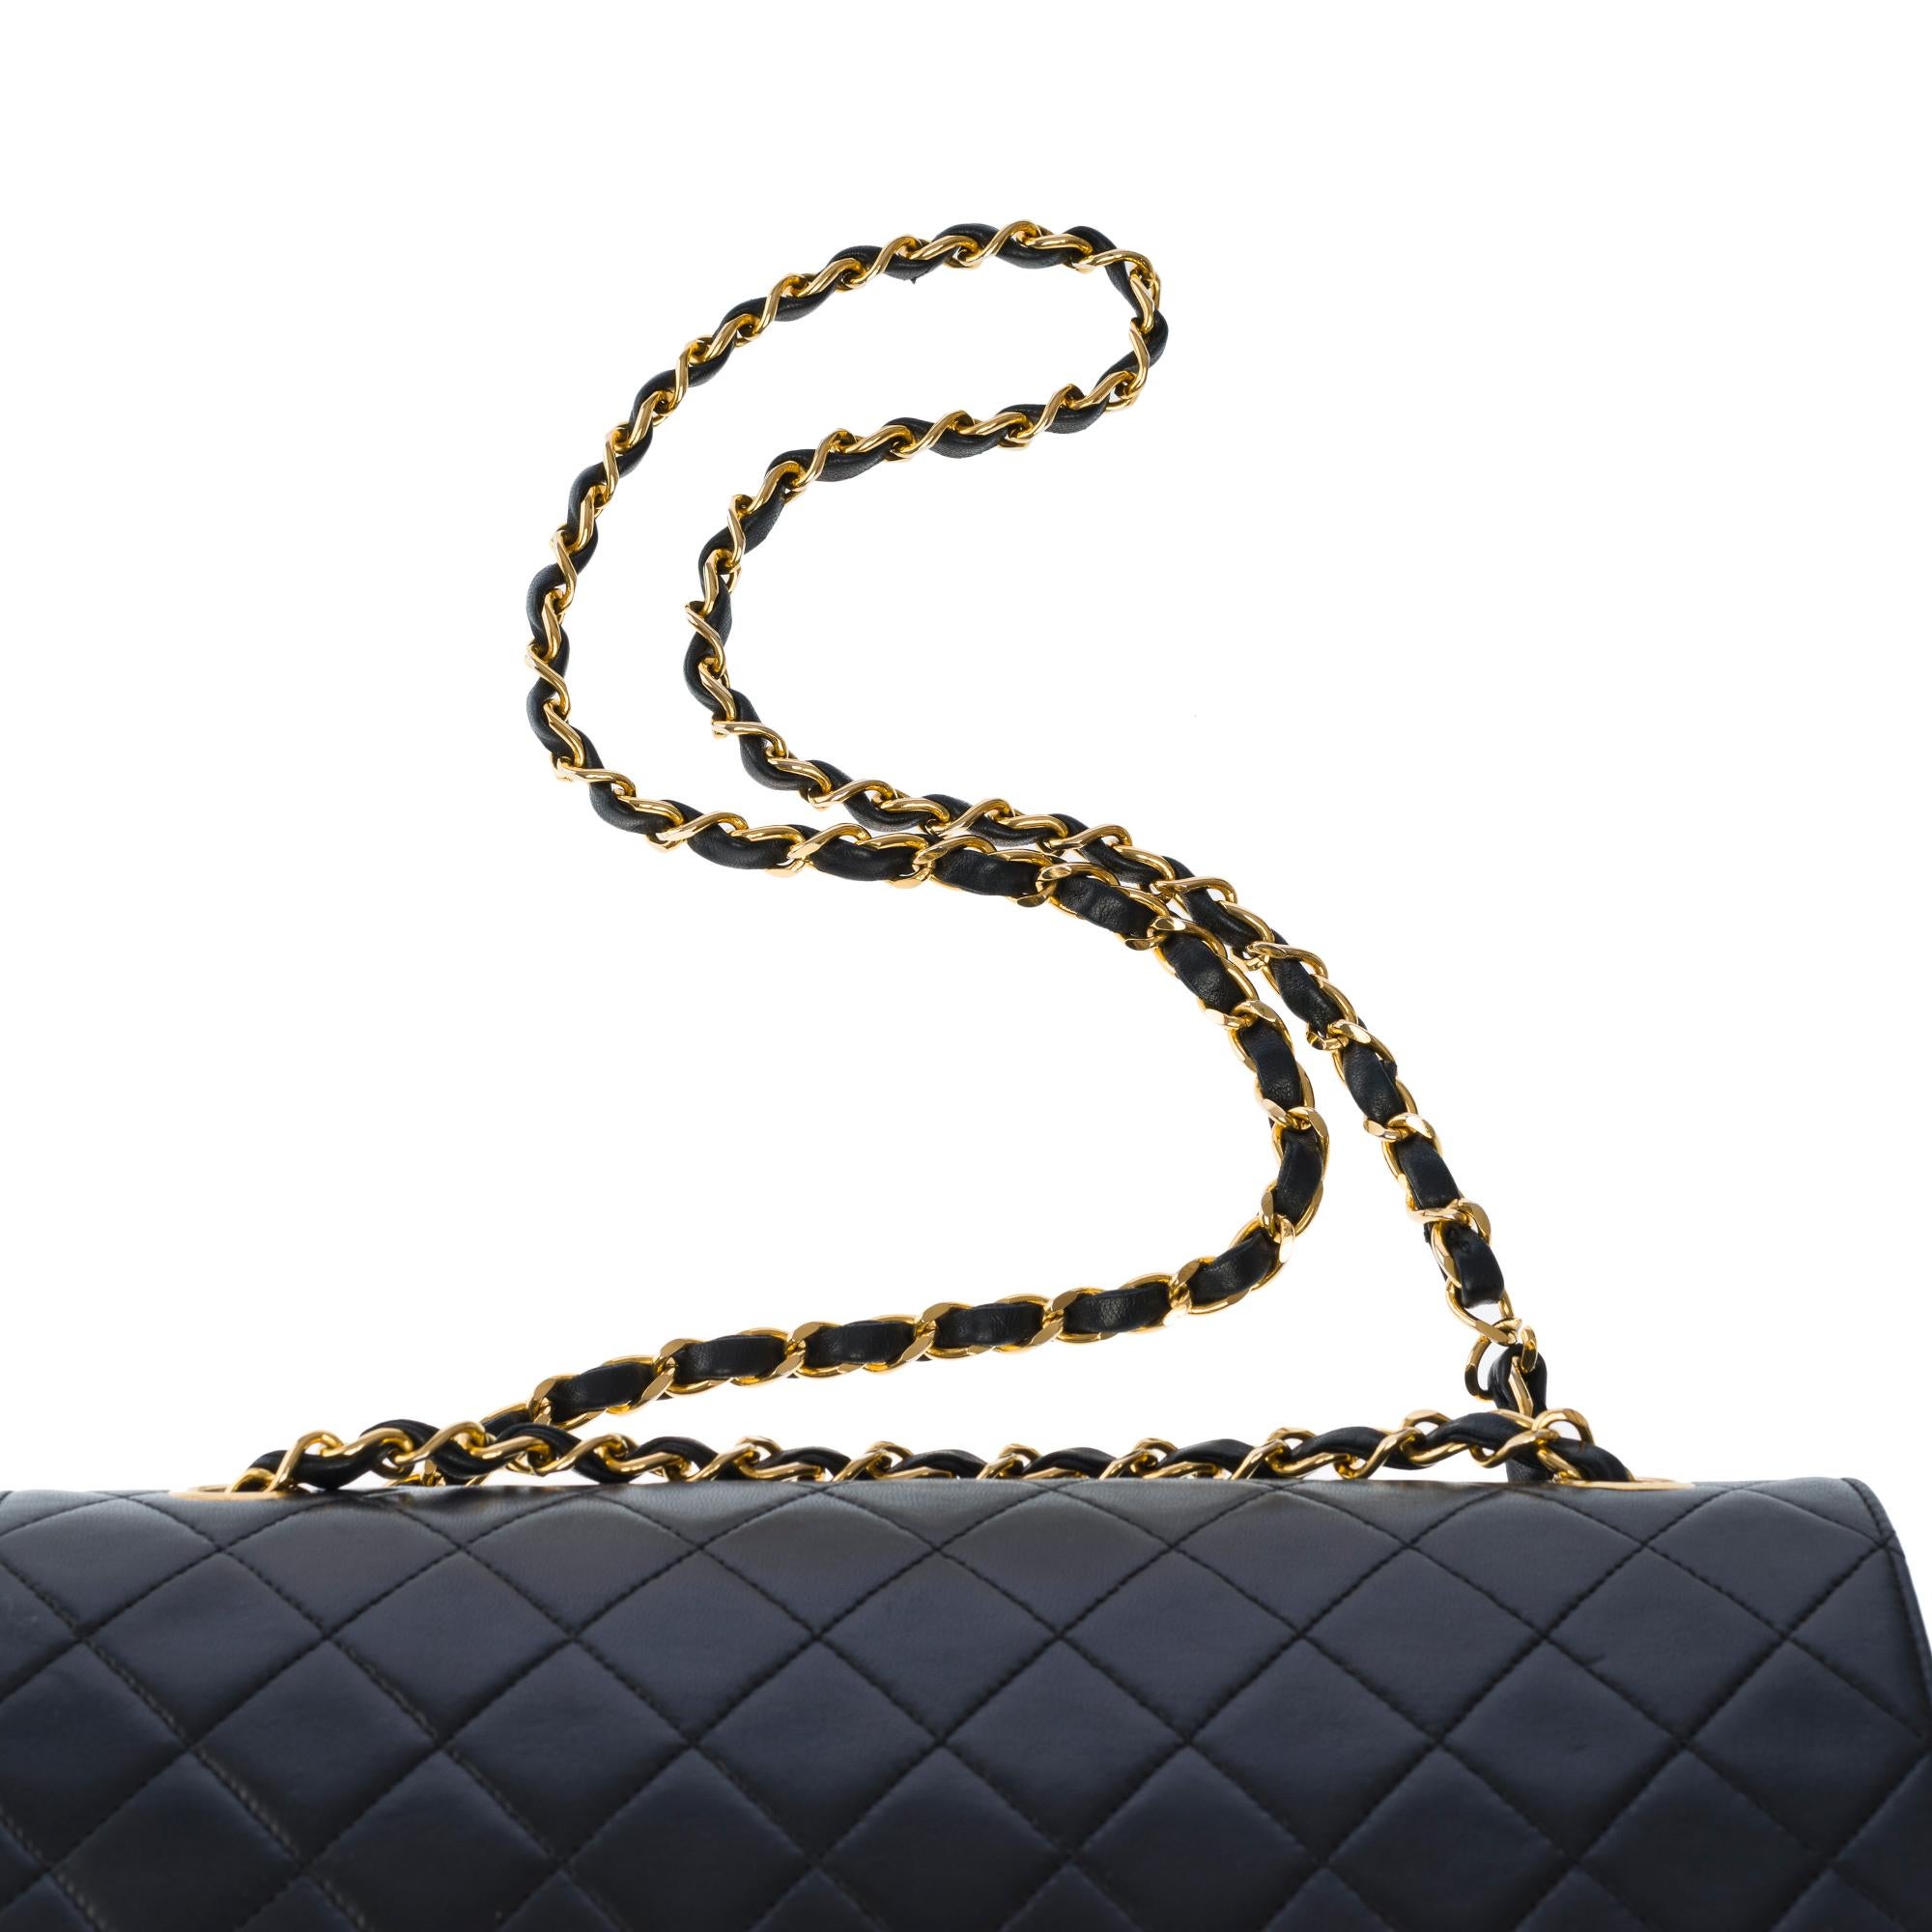 Chanel Timeless/Classic double flap shoulder bag in black quilted lambskin , GHW 6